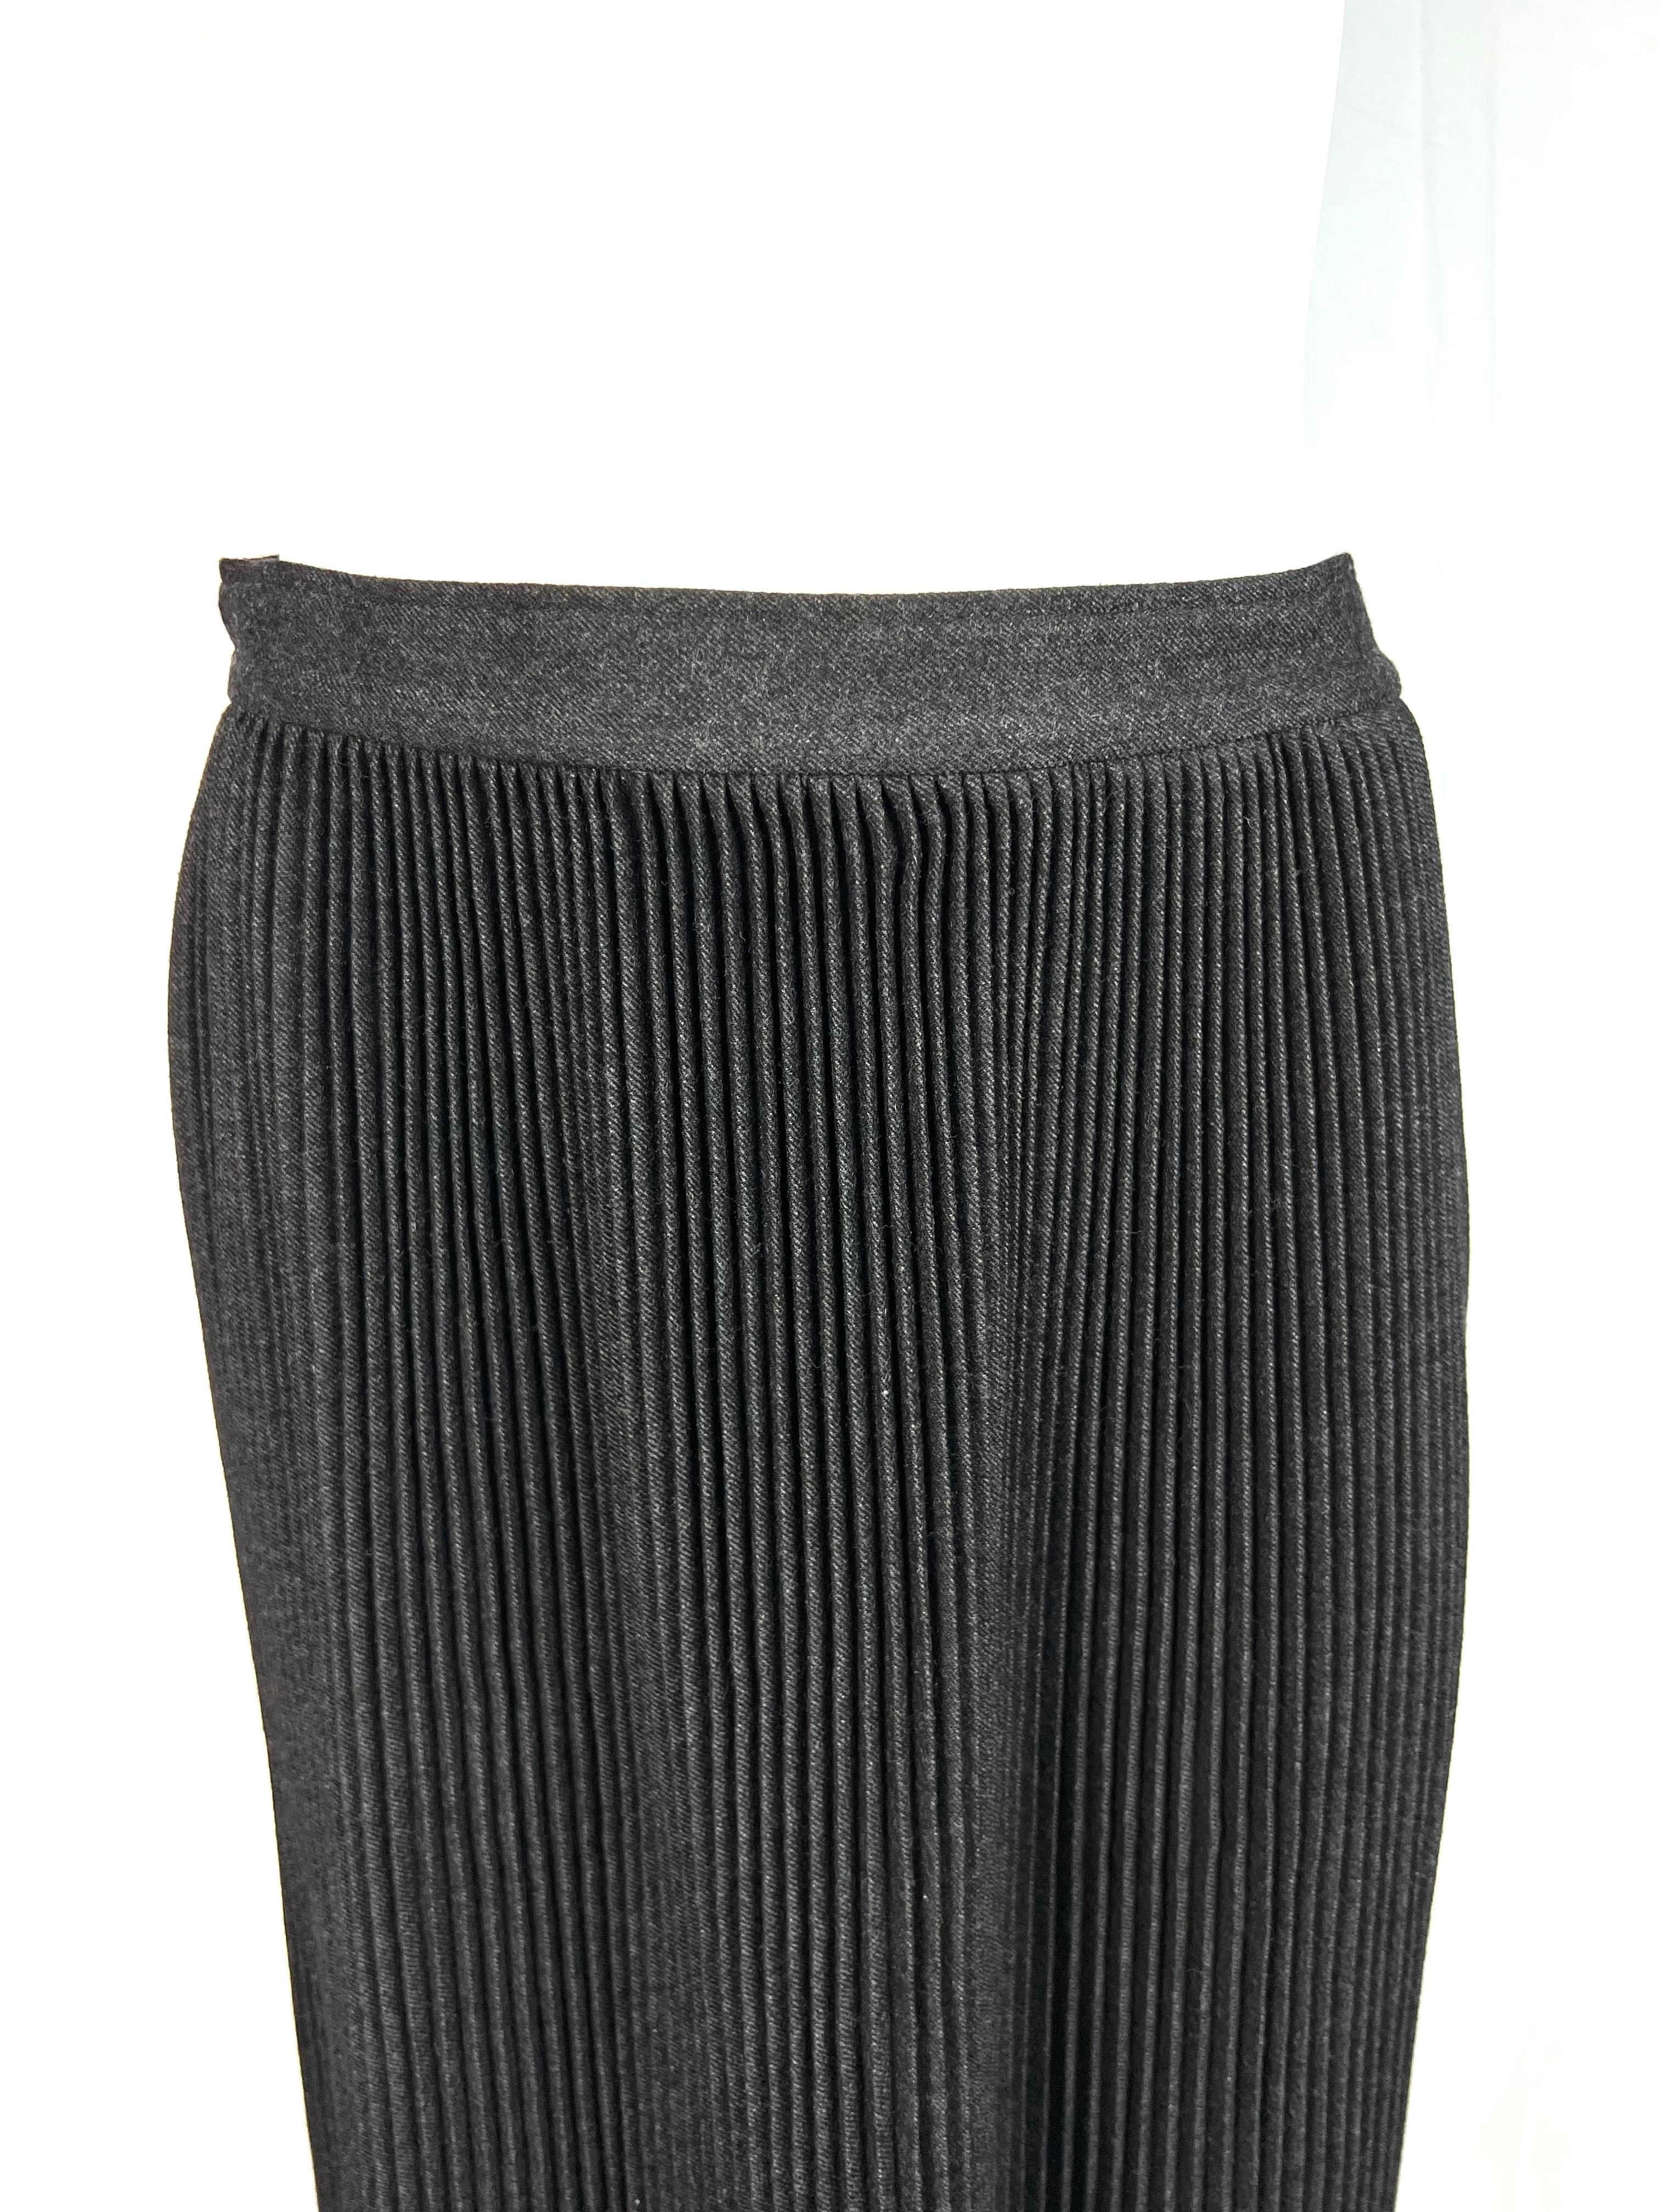 A Valentino pleated midi skirt, in grey color, size 12.
This skirt has a perfect length and is a great elegant option for your formal outfit.
Pleated silhouette flatters any body type and never goes out of fashion so it’s impossible to go wrong with